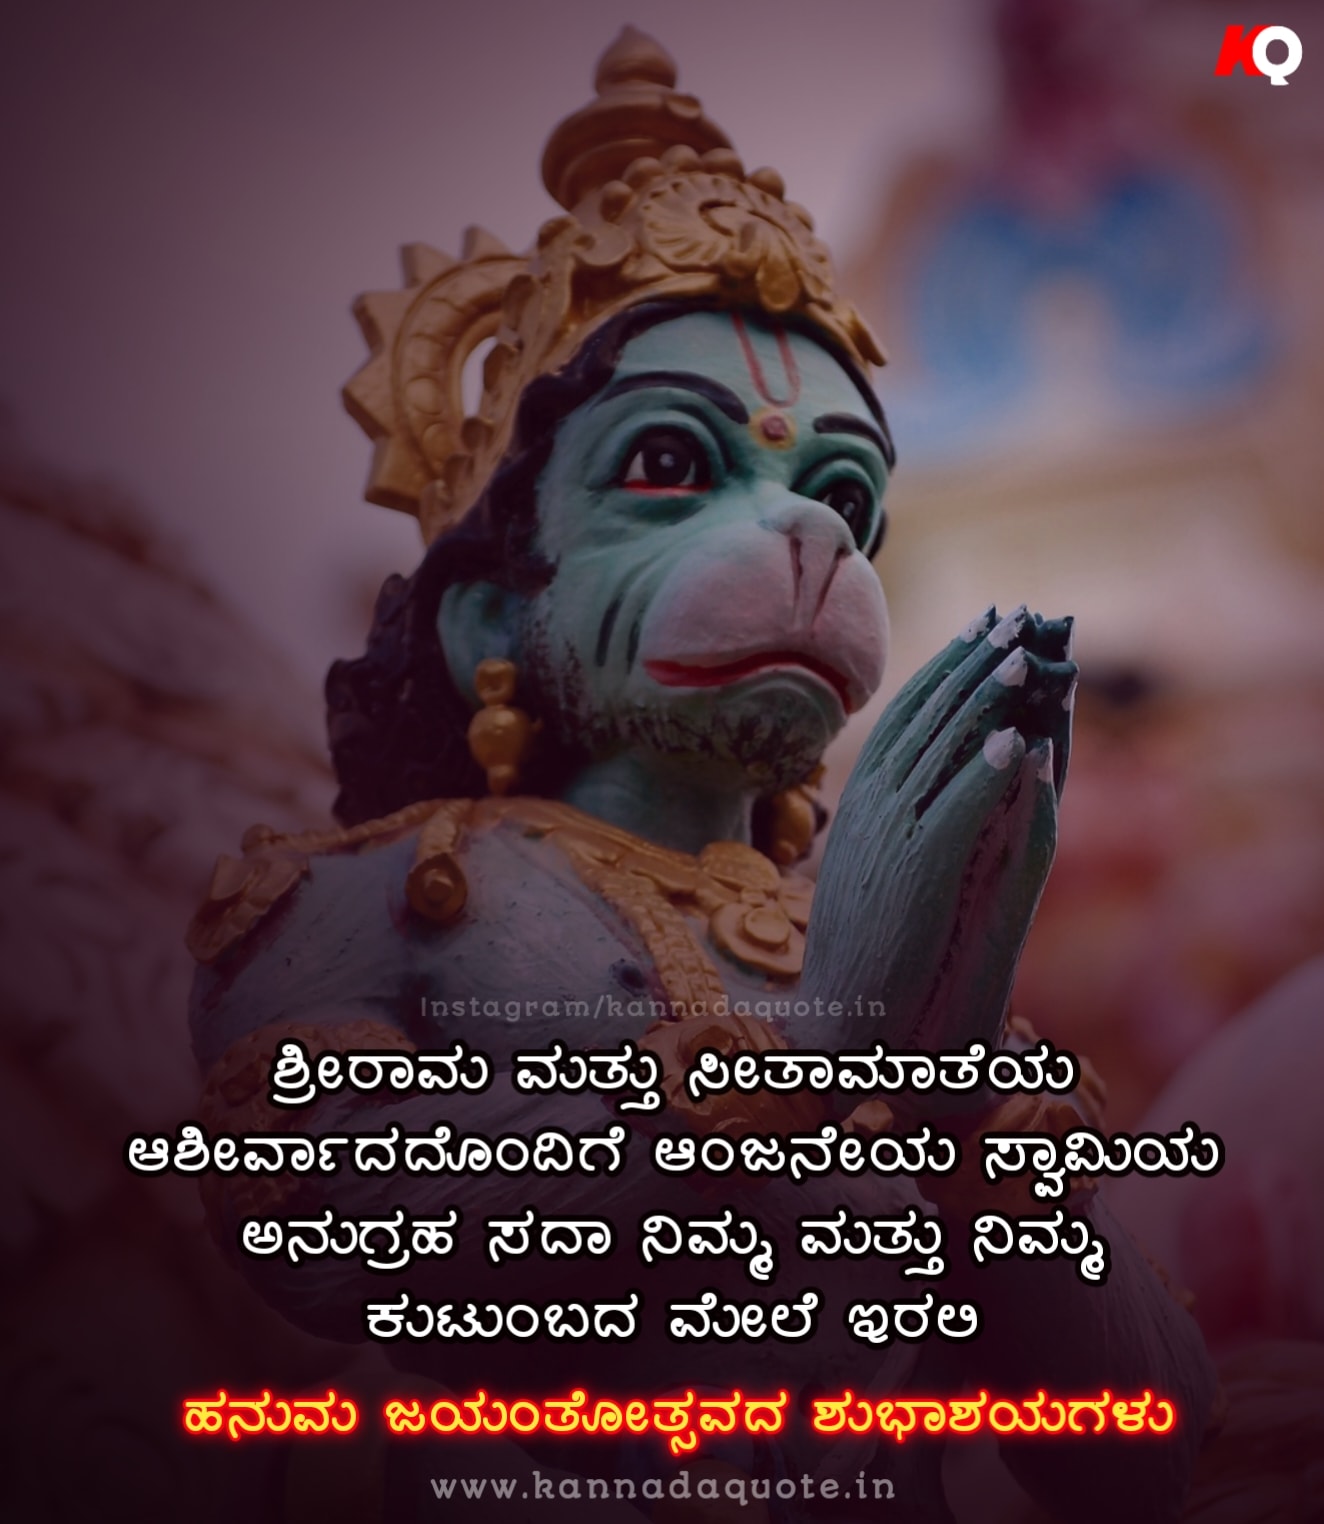 Happy Hanuman jayanti wishes quotes text messages in kannada